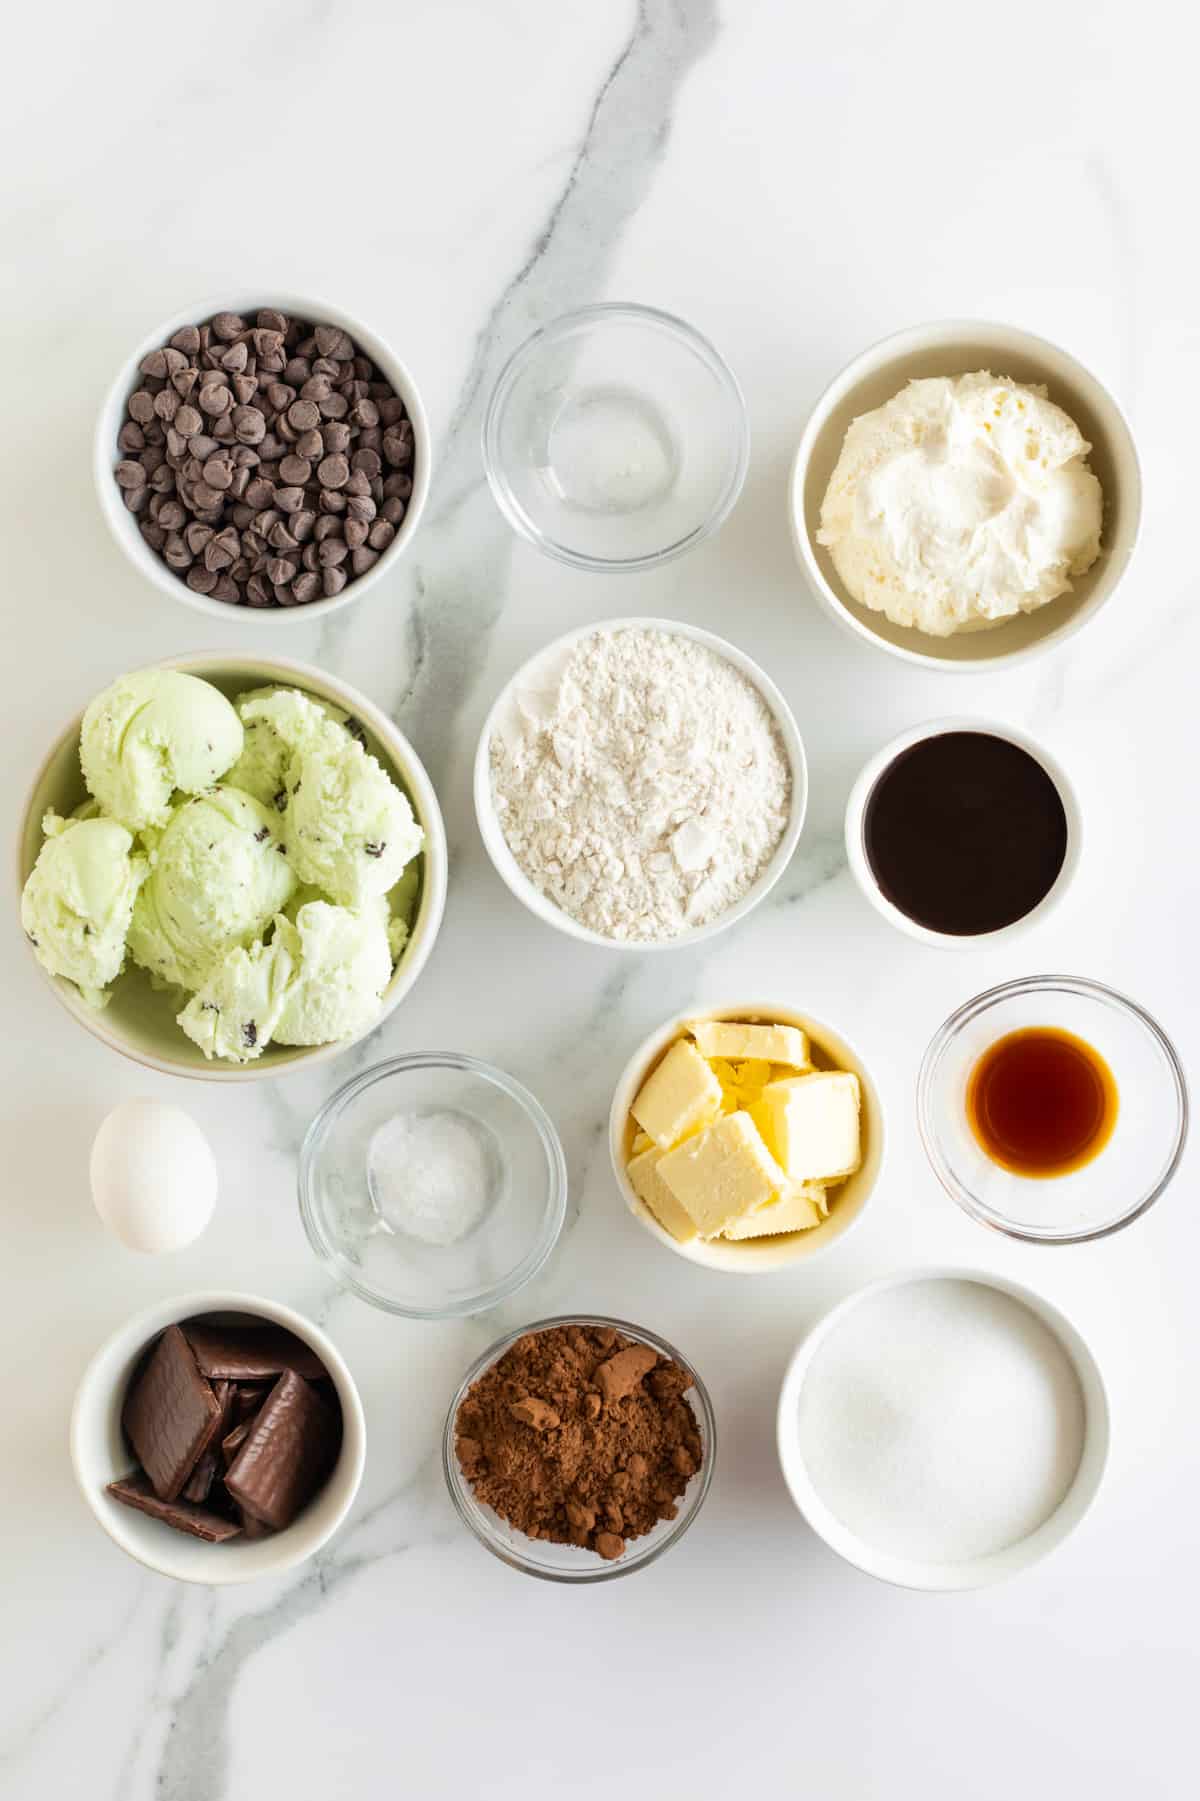 Mint chocolate chip ice cream, butter, vanilla extract, flour, Cool Whip, Andes Mints, cocoa powder in small dishes.